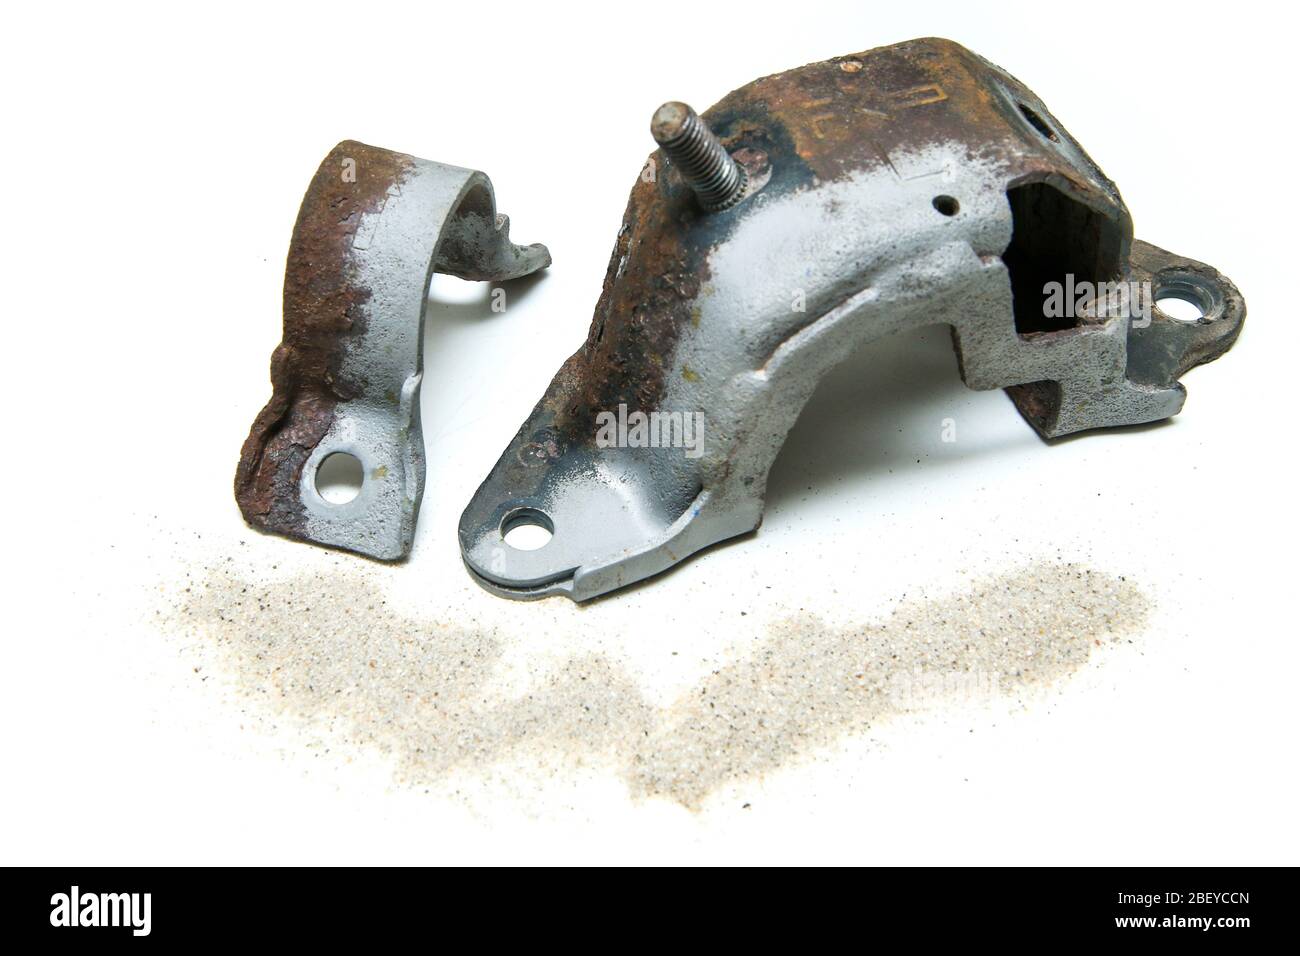 The overgrown rusty cast iron parts partly sand blasted together with sand isolated in a white background. Stock Photo